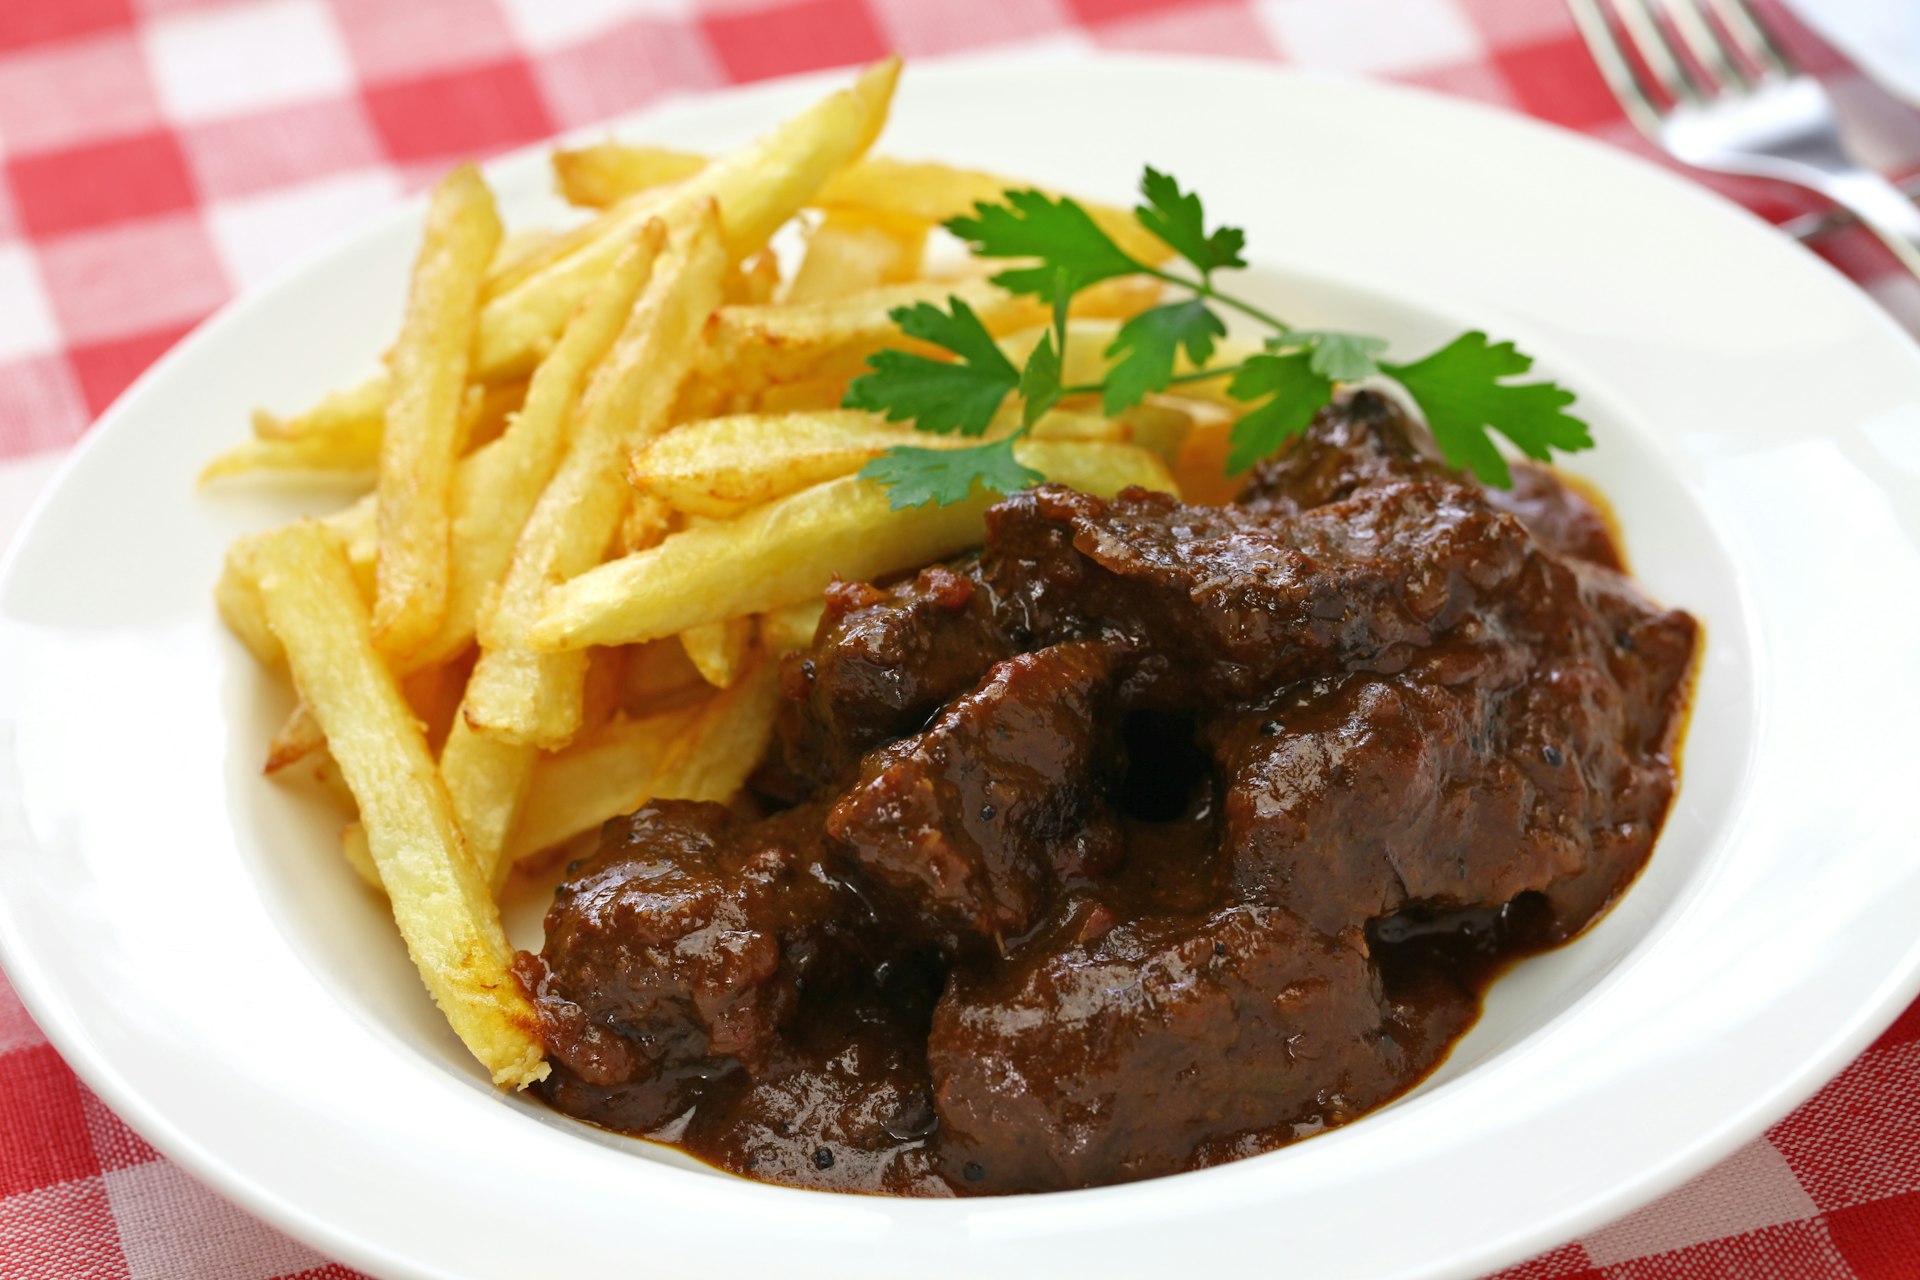 A plate of beef stew and fries on a checked red and white table cloth